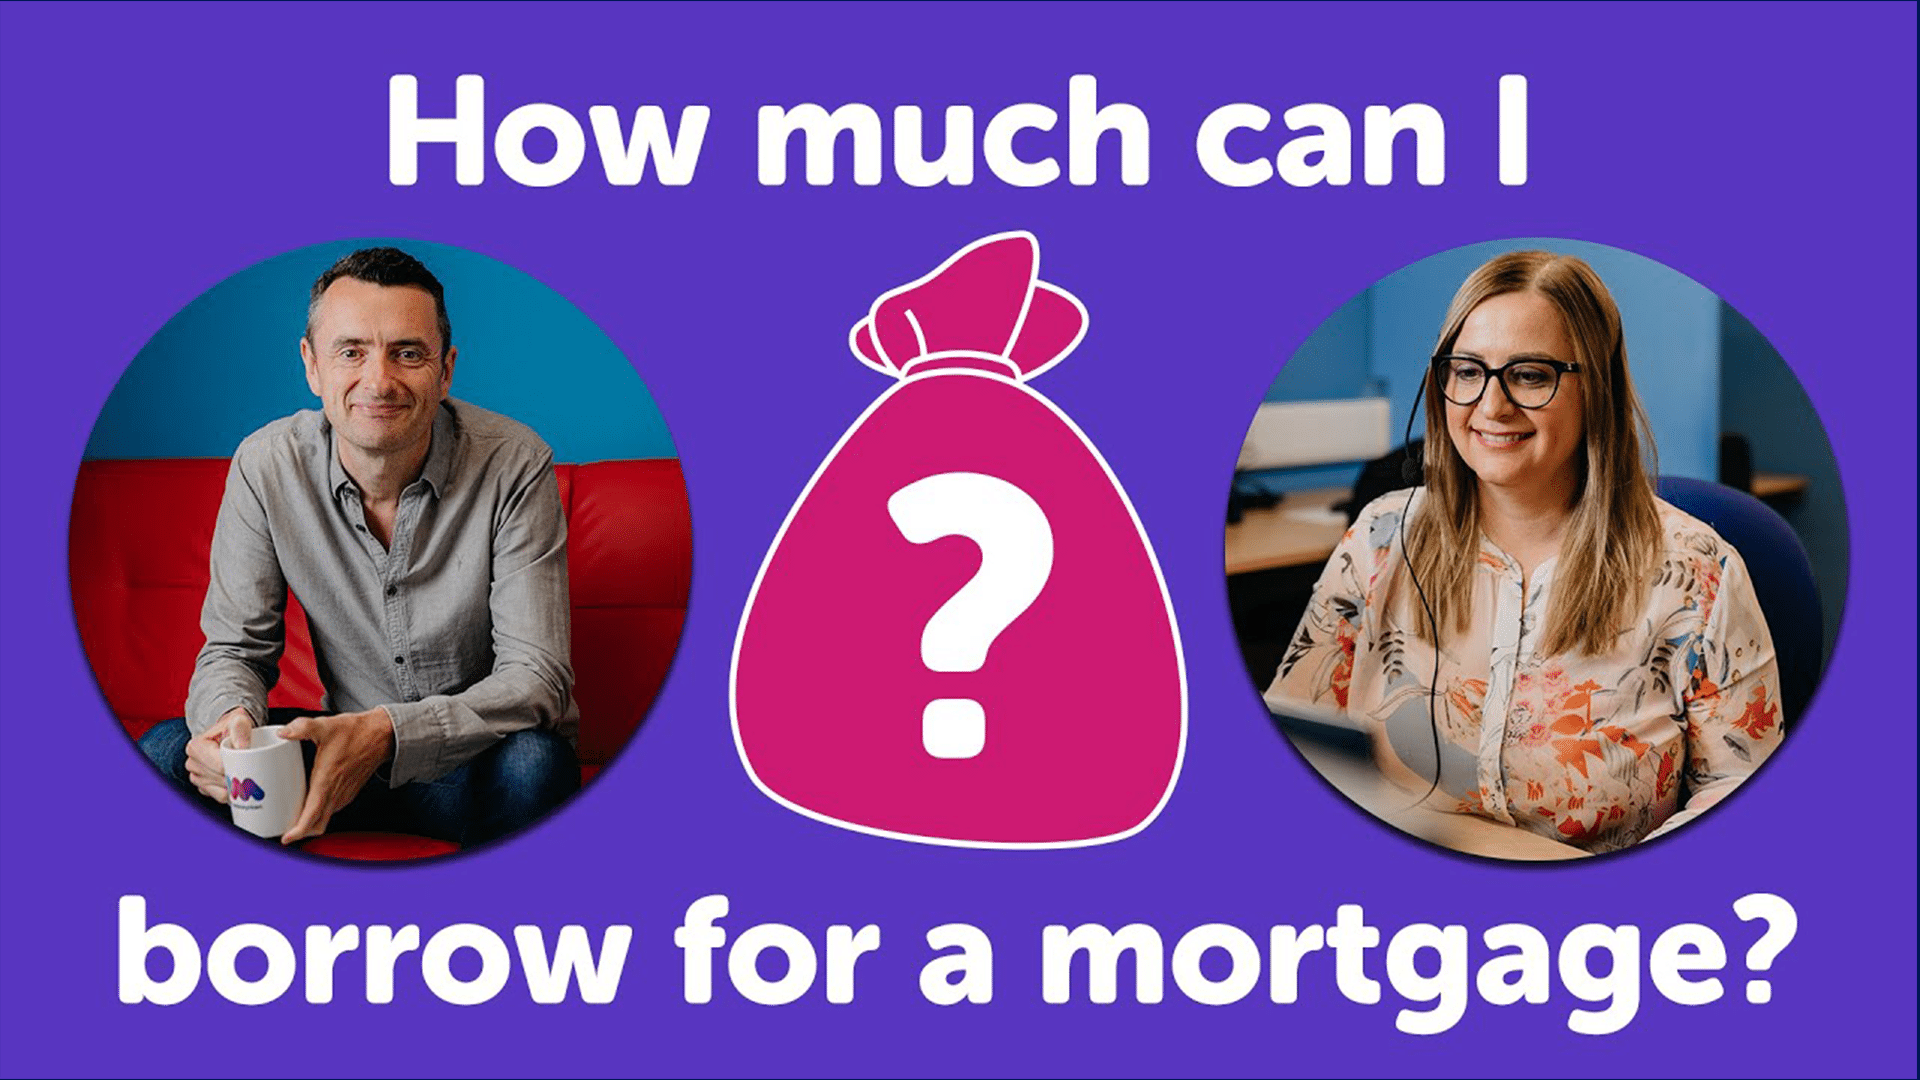 How Much Can I Borrow For a Mortgage in Manchester?